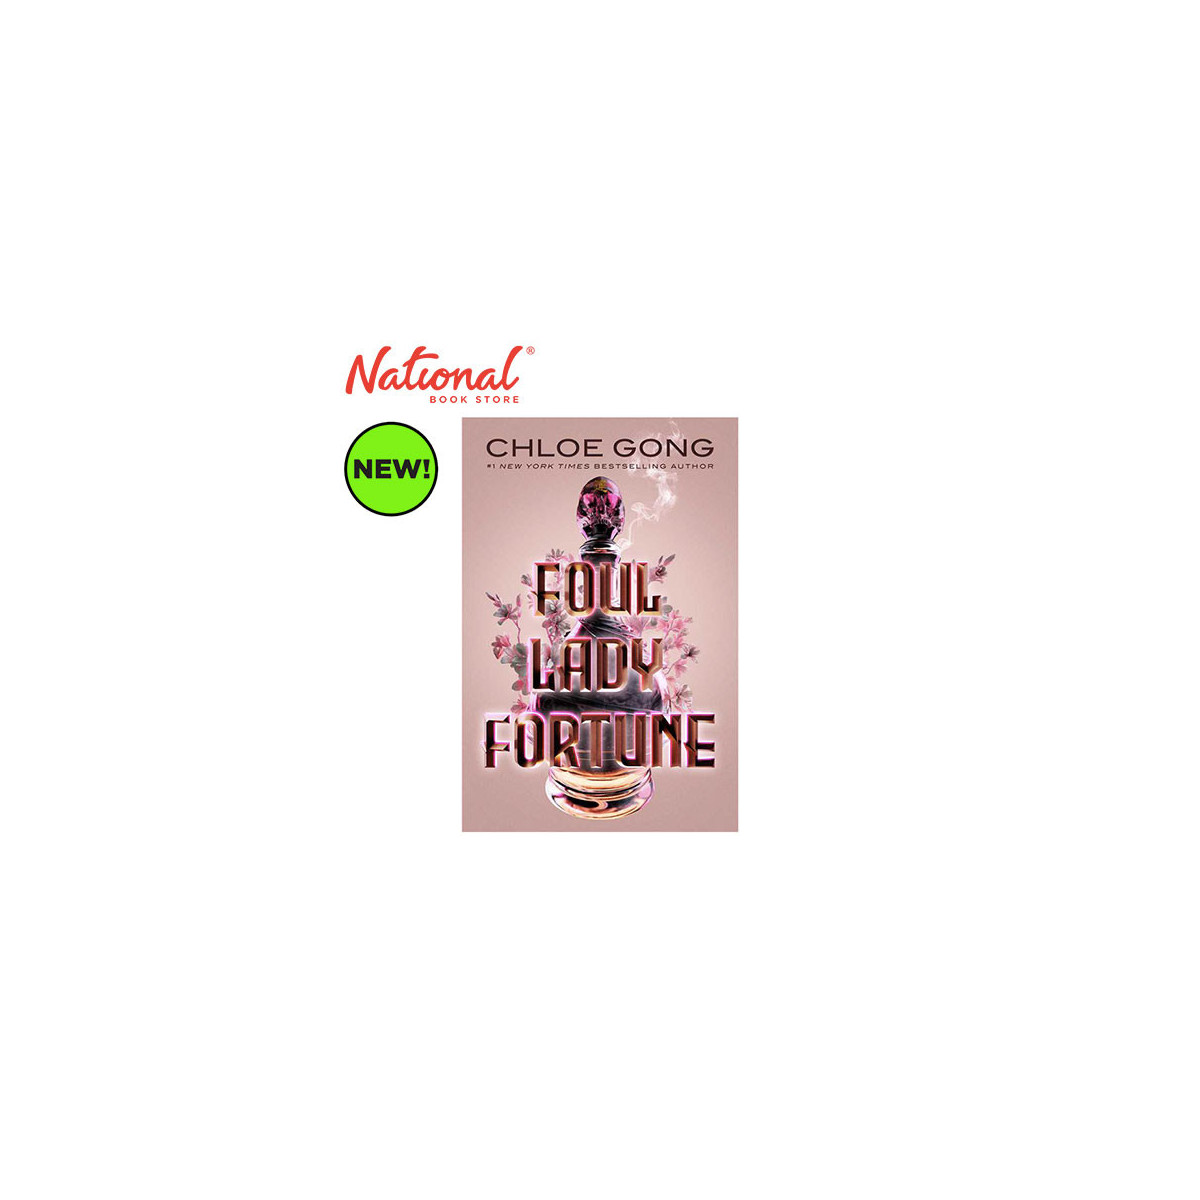 Foul Lady Fortune by Chloe Gong - Trade Paperback